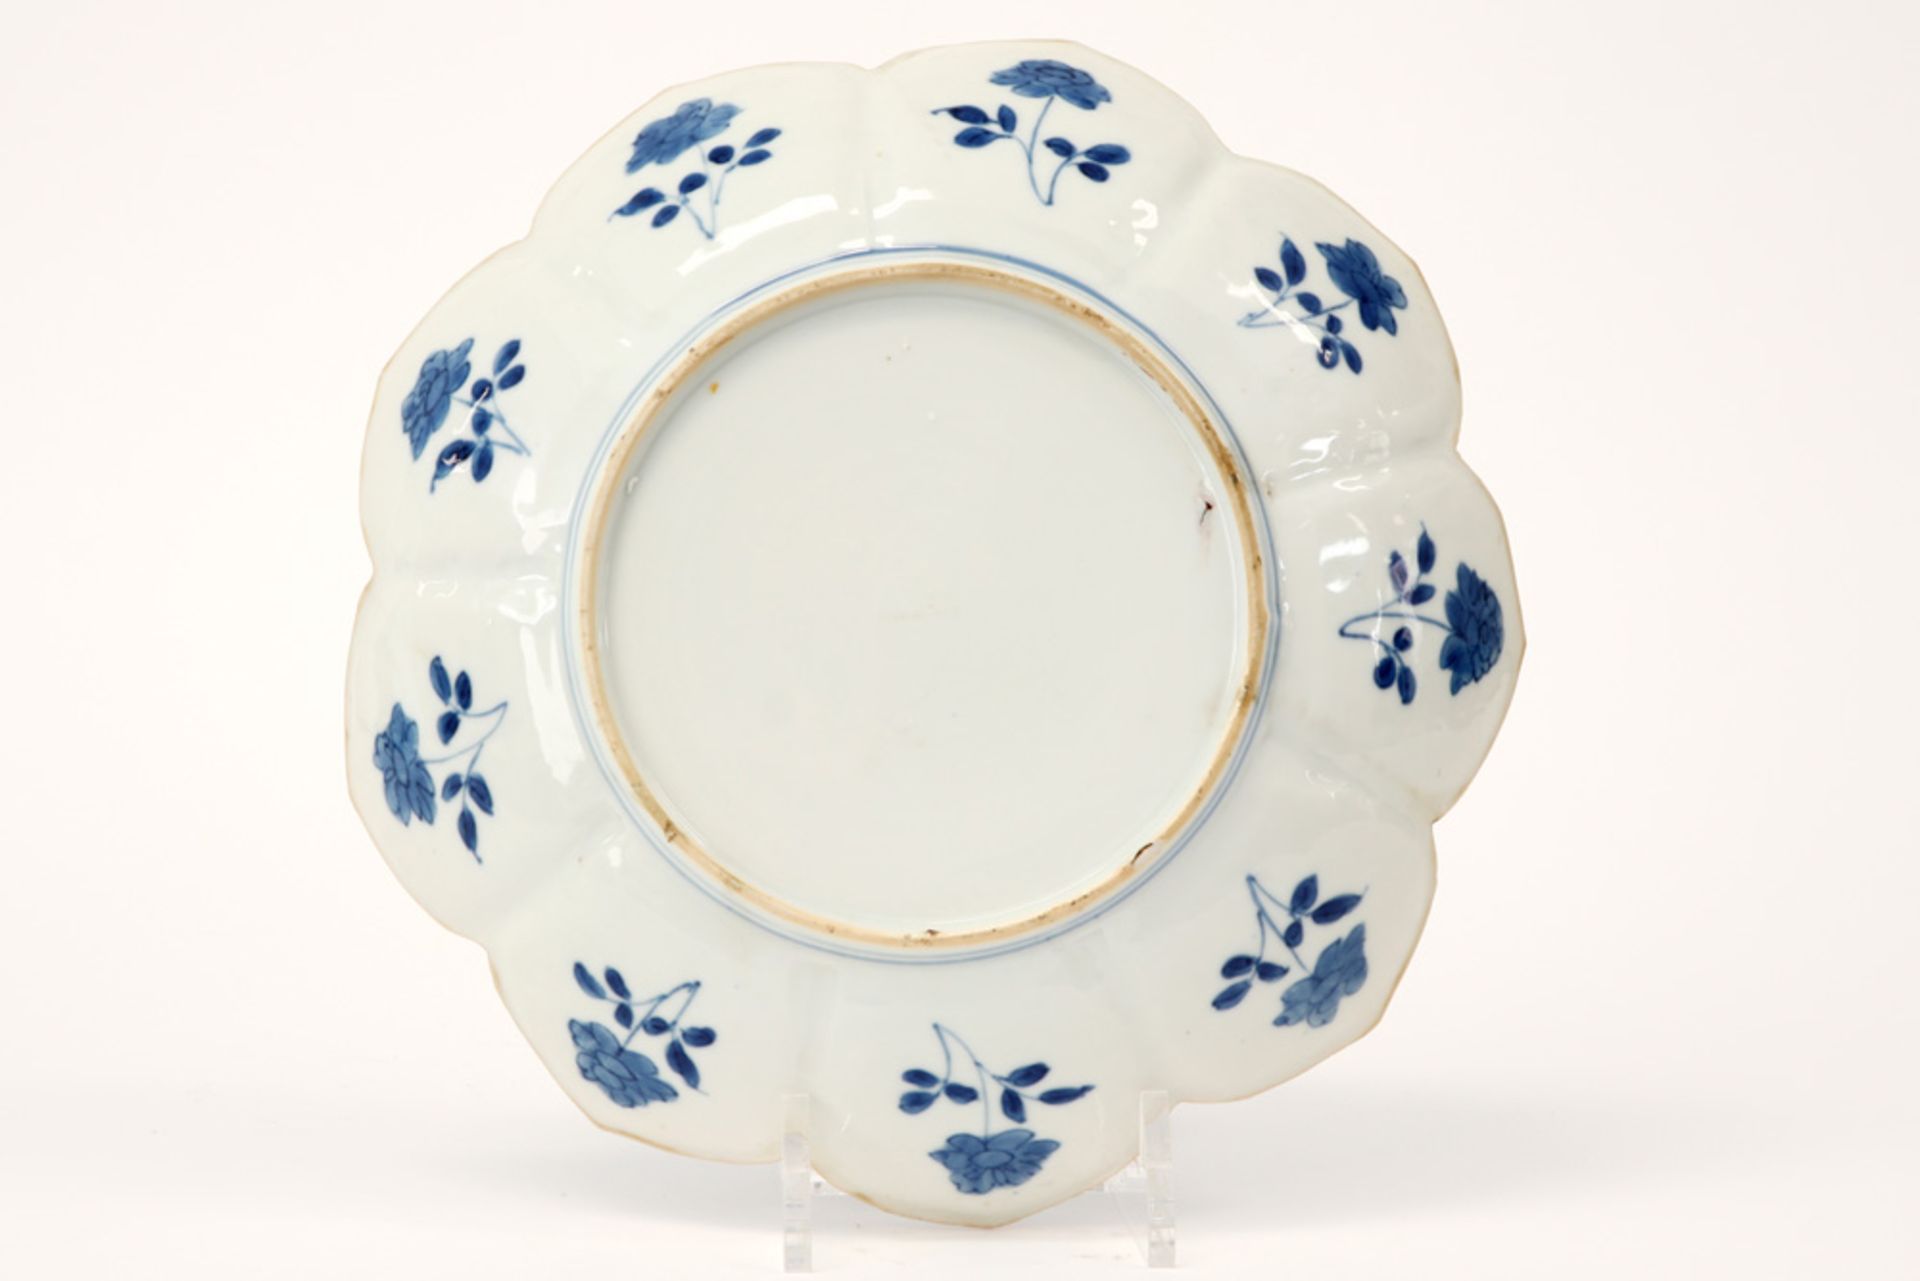 17th/18th Cent. lotusflower-shaped Chinese Kang Hsi period dish in porcelain with a blue-white decor - Image 3 of 3